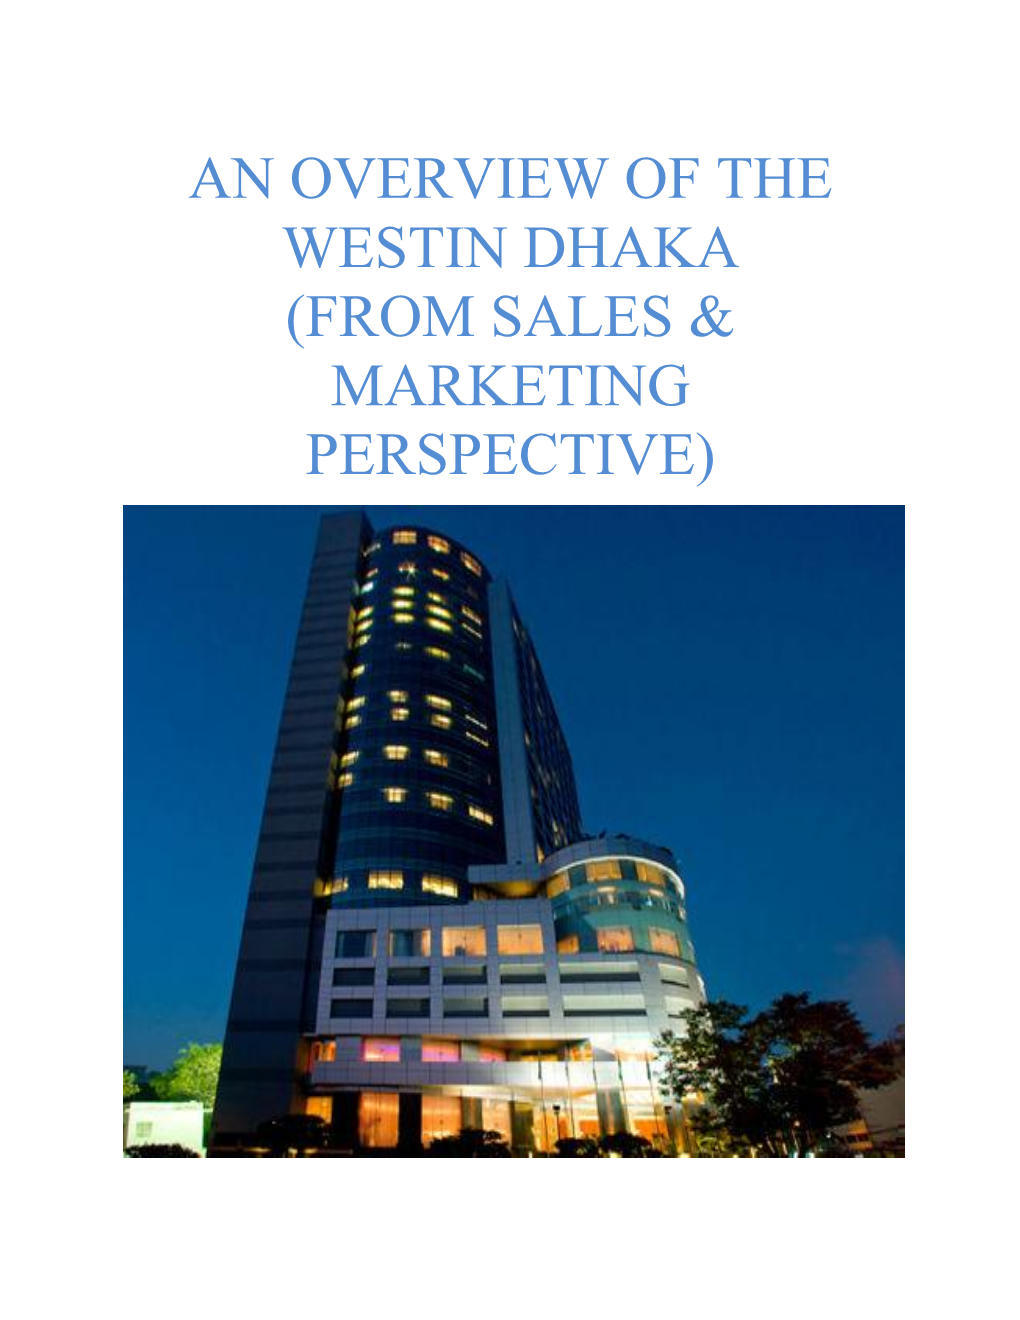 An Overview of the Westin Dhaka (From Sales & Marketing Perspective)